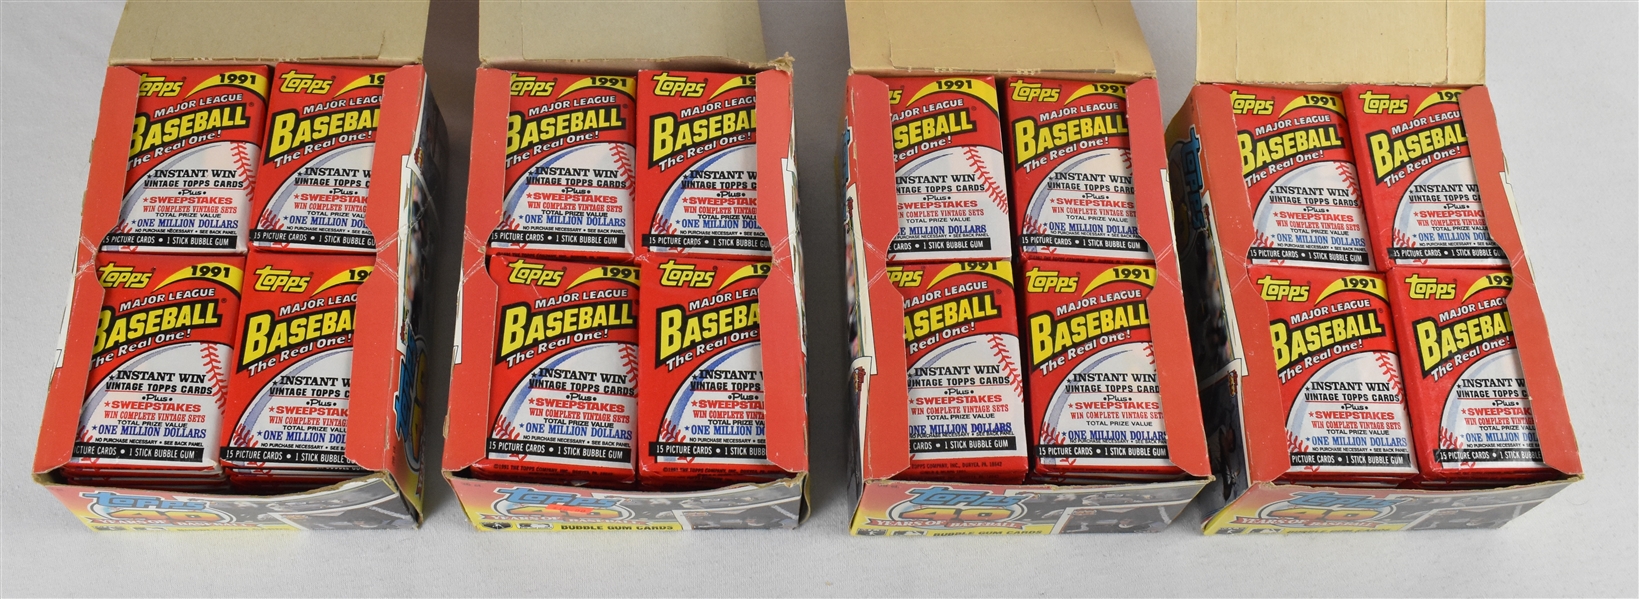 Lot of 4 Topps 1991 Unopened Boxes of Wax Packs